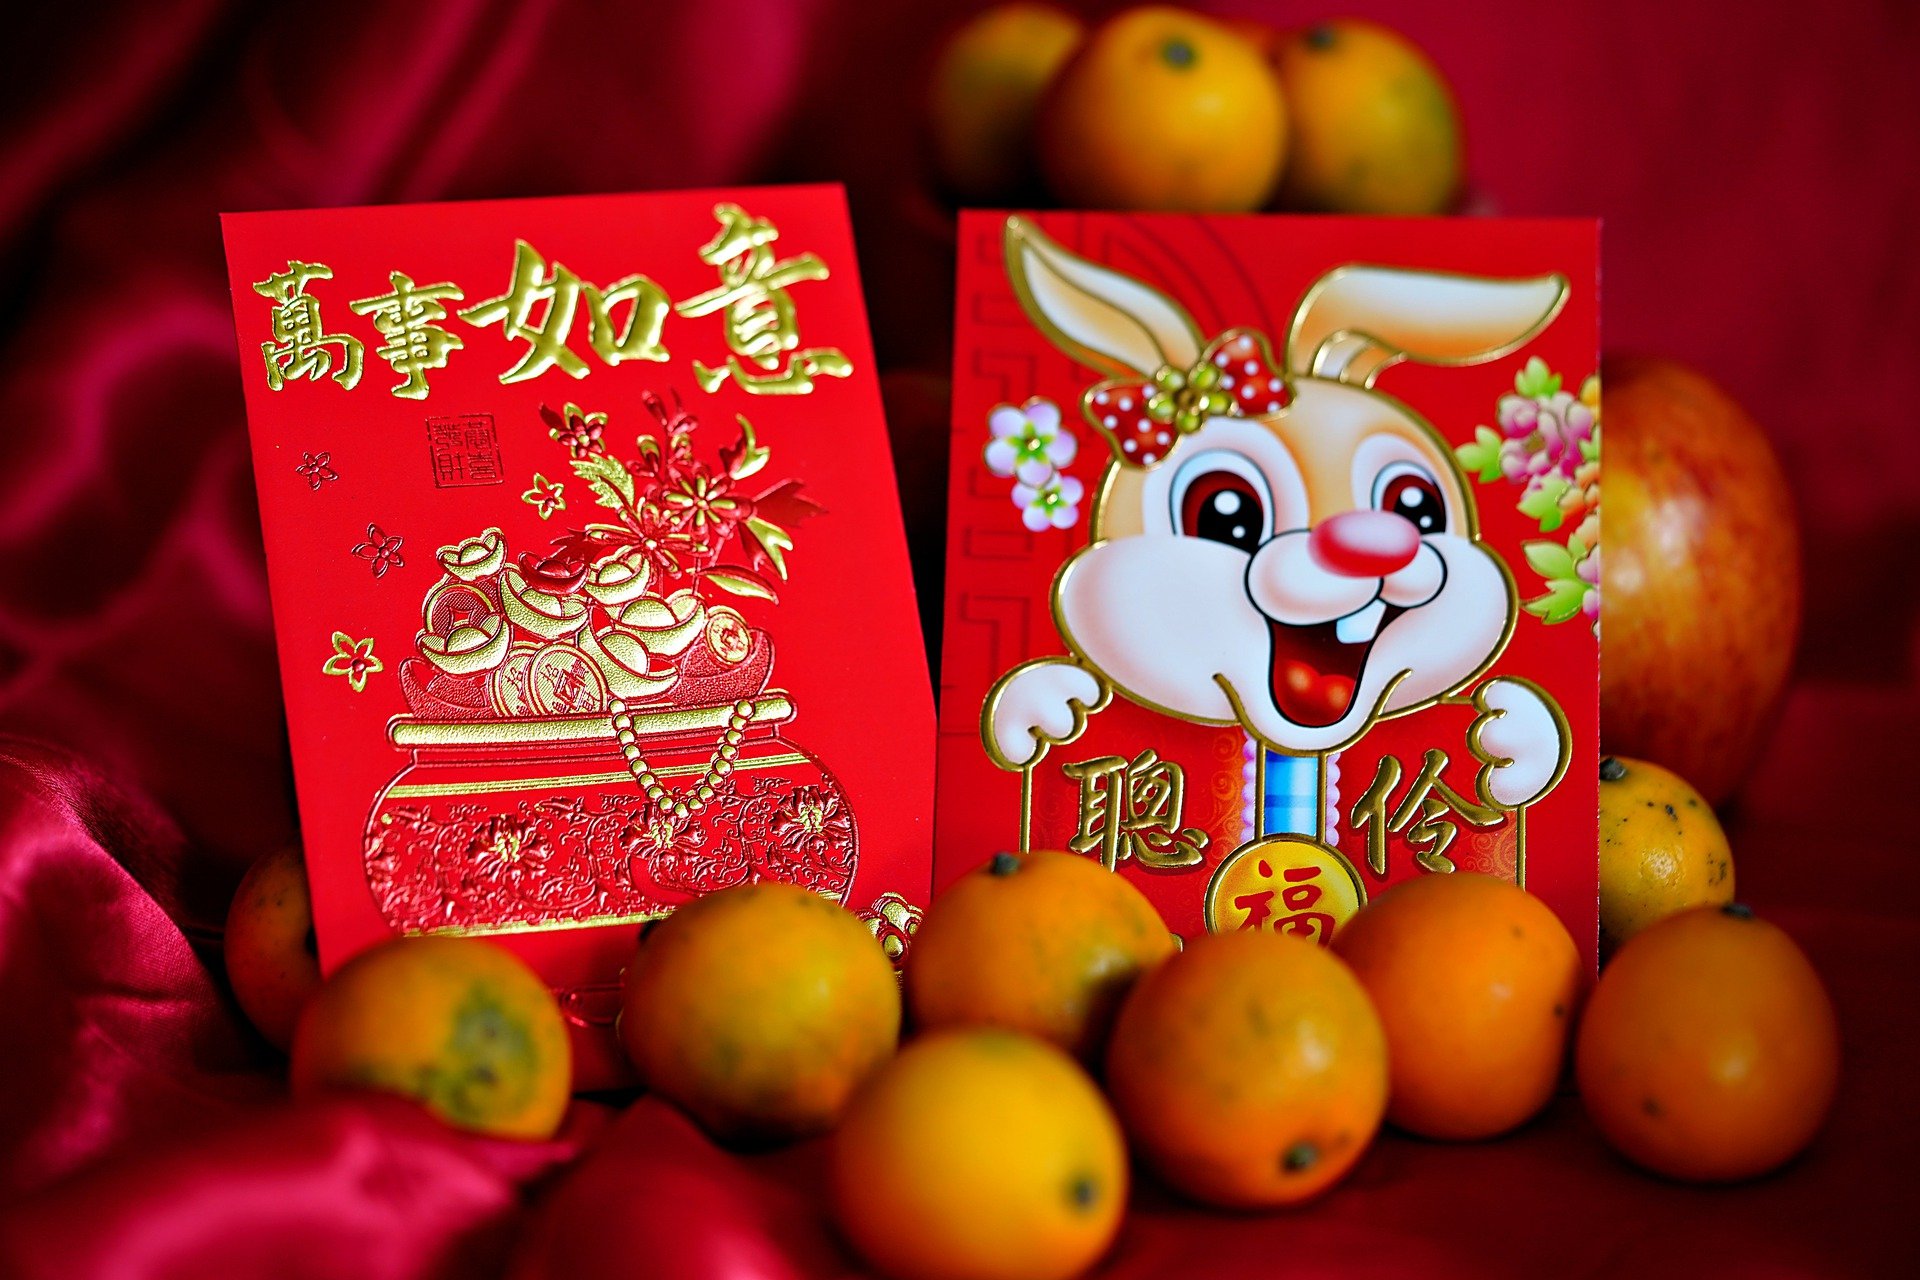 Two red packets with one showing a smiling rabbit standing among an apple and some kumquats